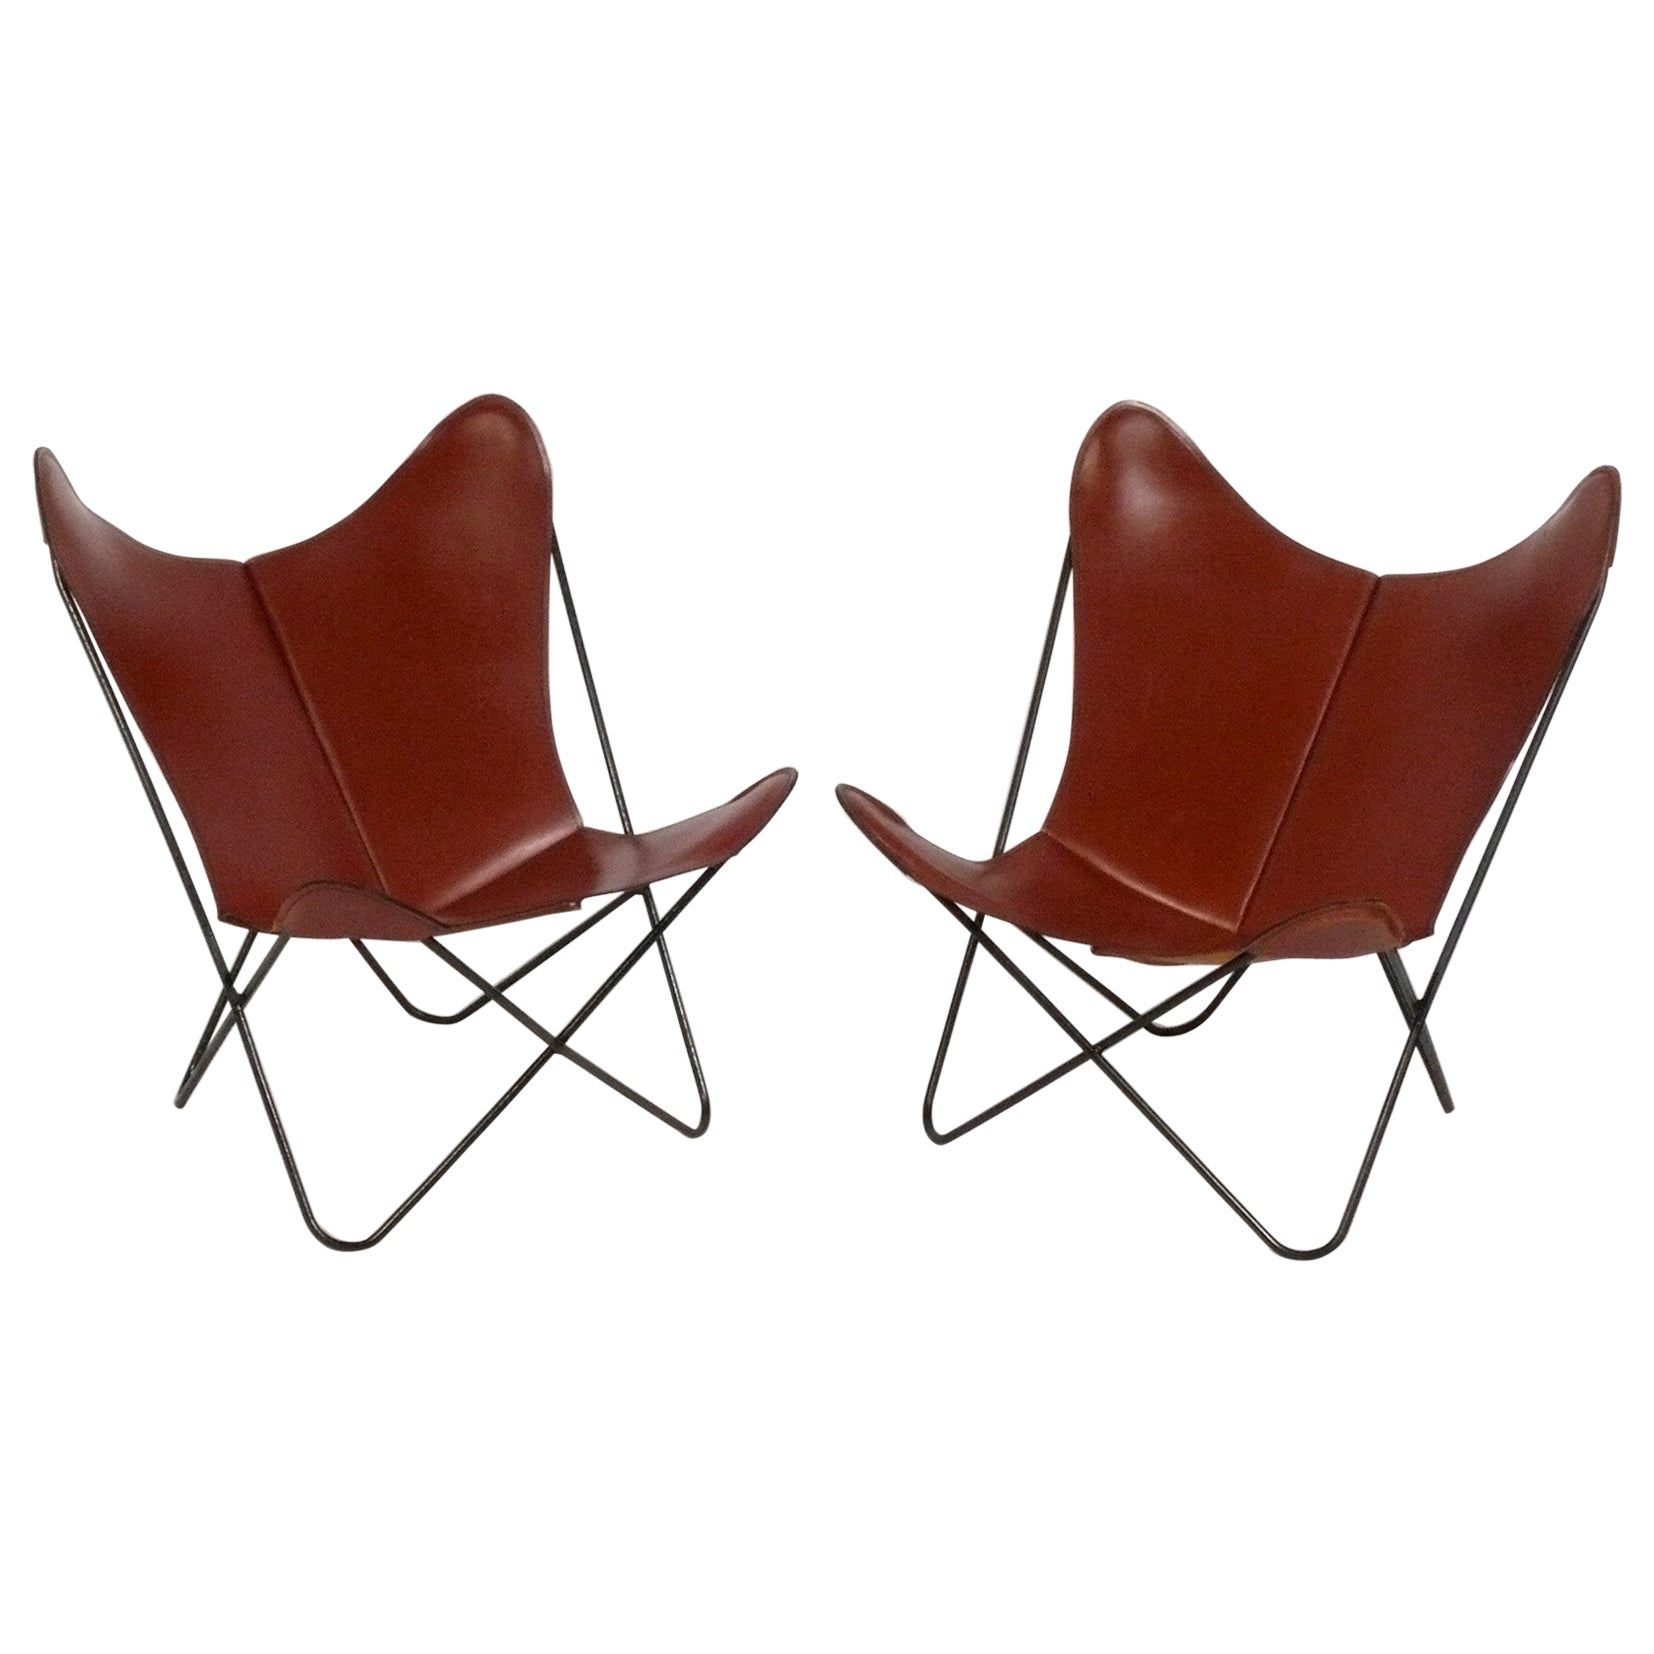 Sculptural Butterfly Lounge Chairs by Jorge Ferrari Hardoy in Cognac Leather For Sale